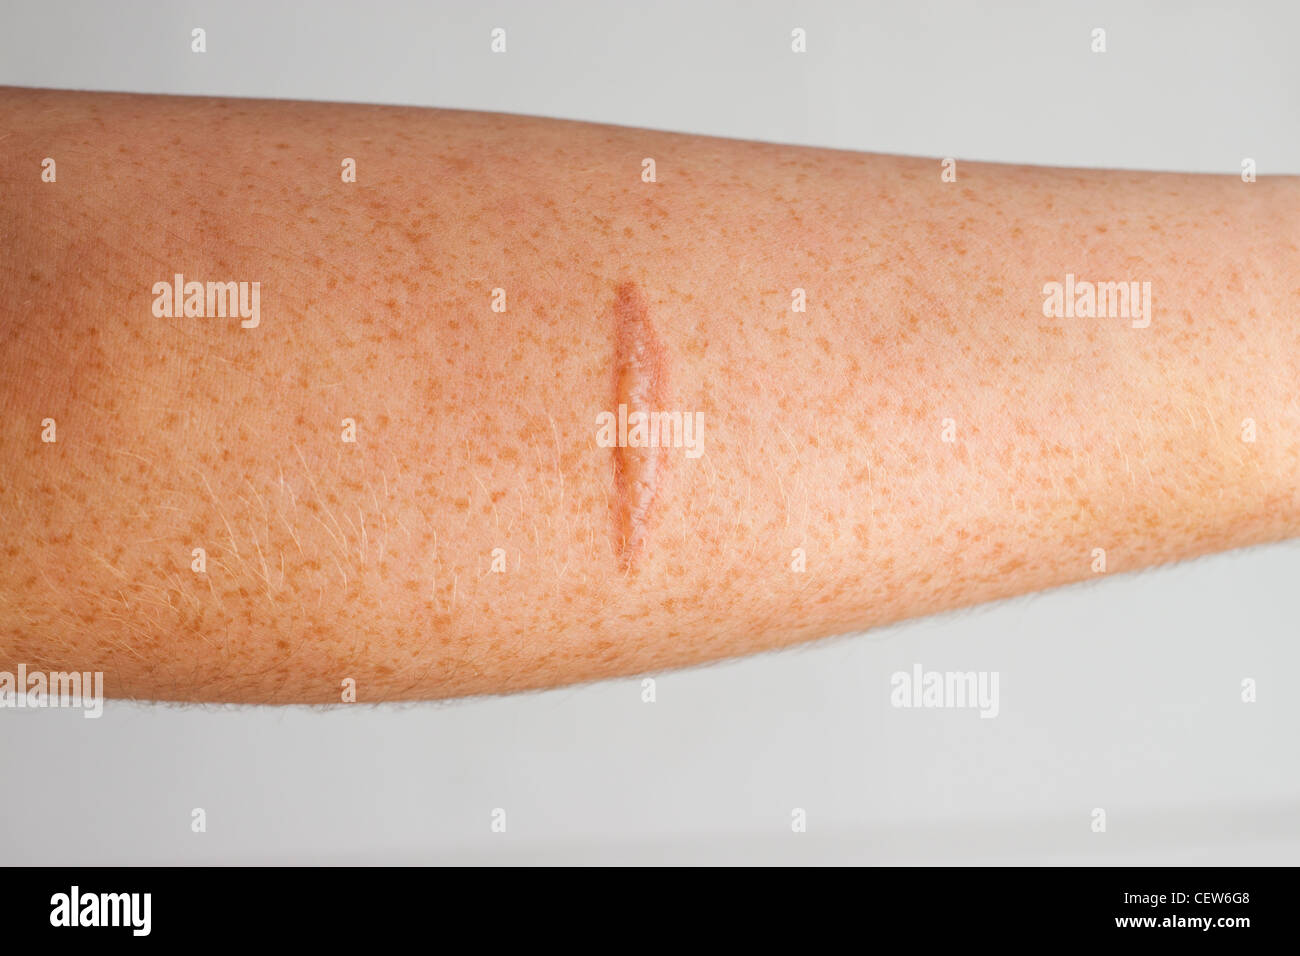 Burn scar on the skin of a persons forearm Stock Photo